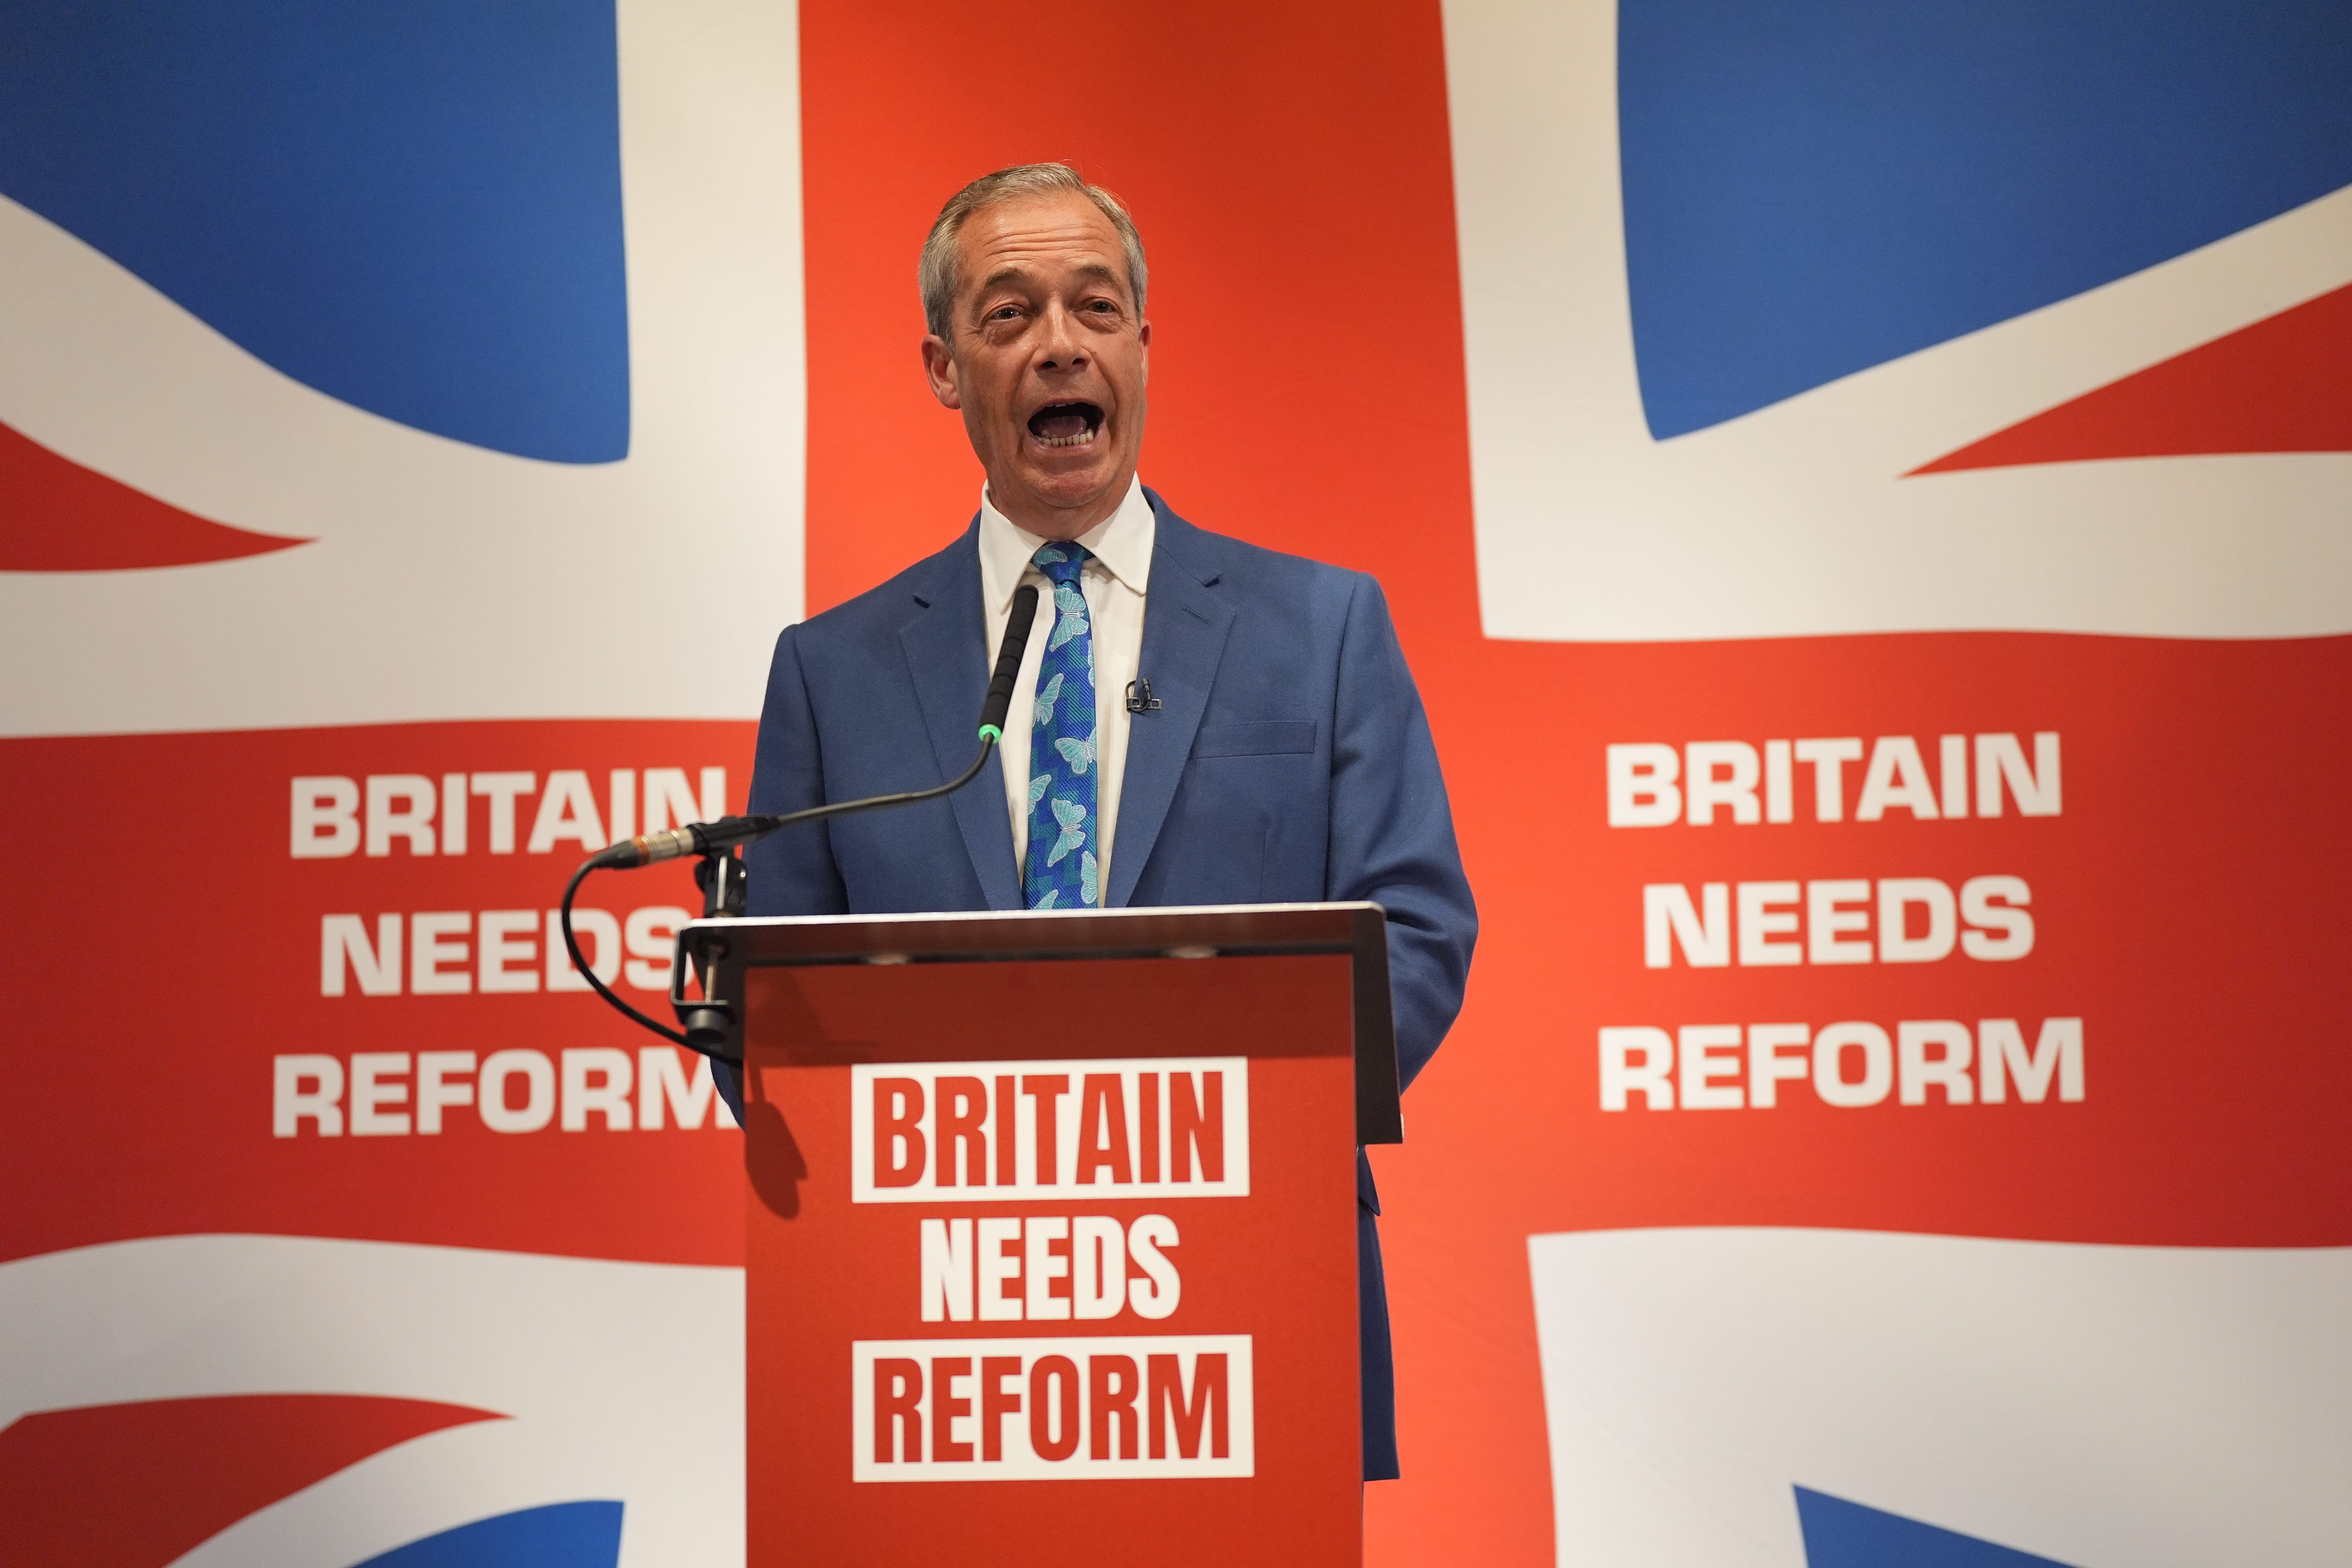 Nigel Farage during a press conference to announce that he will become the new leader of Reform UK, at The Glaziers Hall in London (Yui Mok/PA)